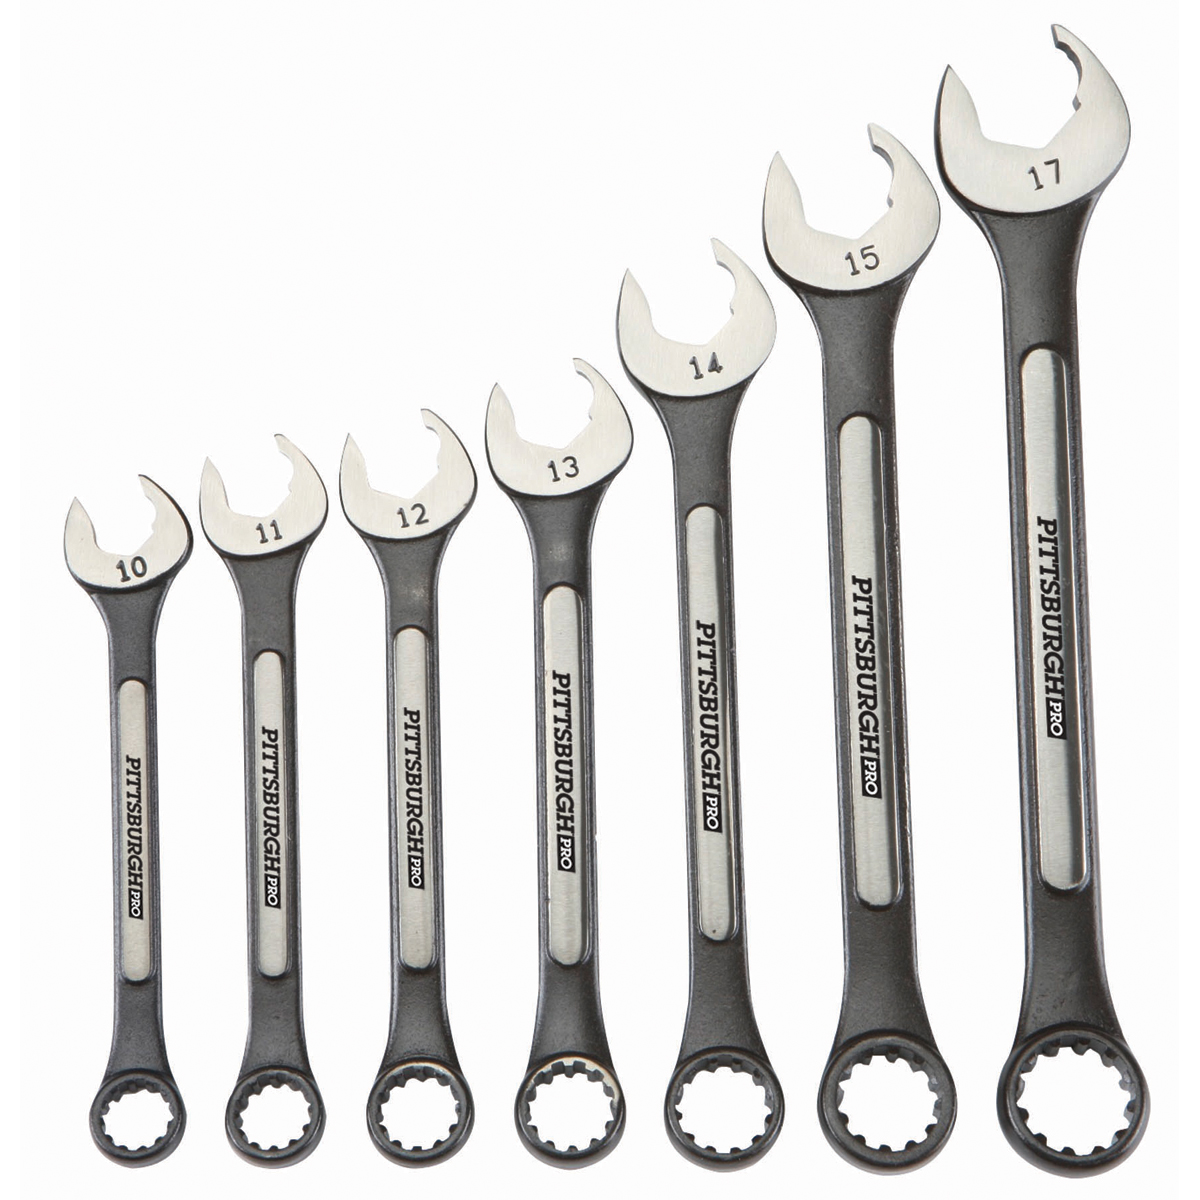 PITTSBURGH Metric Universal Combination Wrench Set 7 Pc. - Item 69329